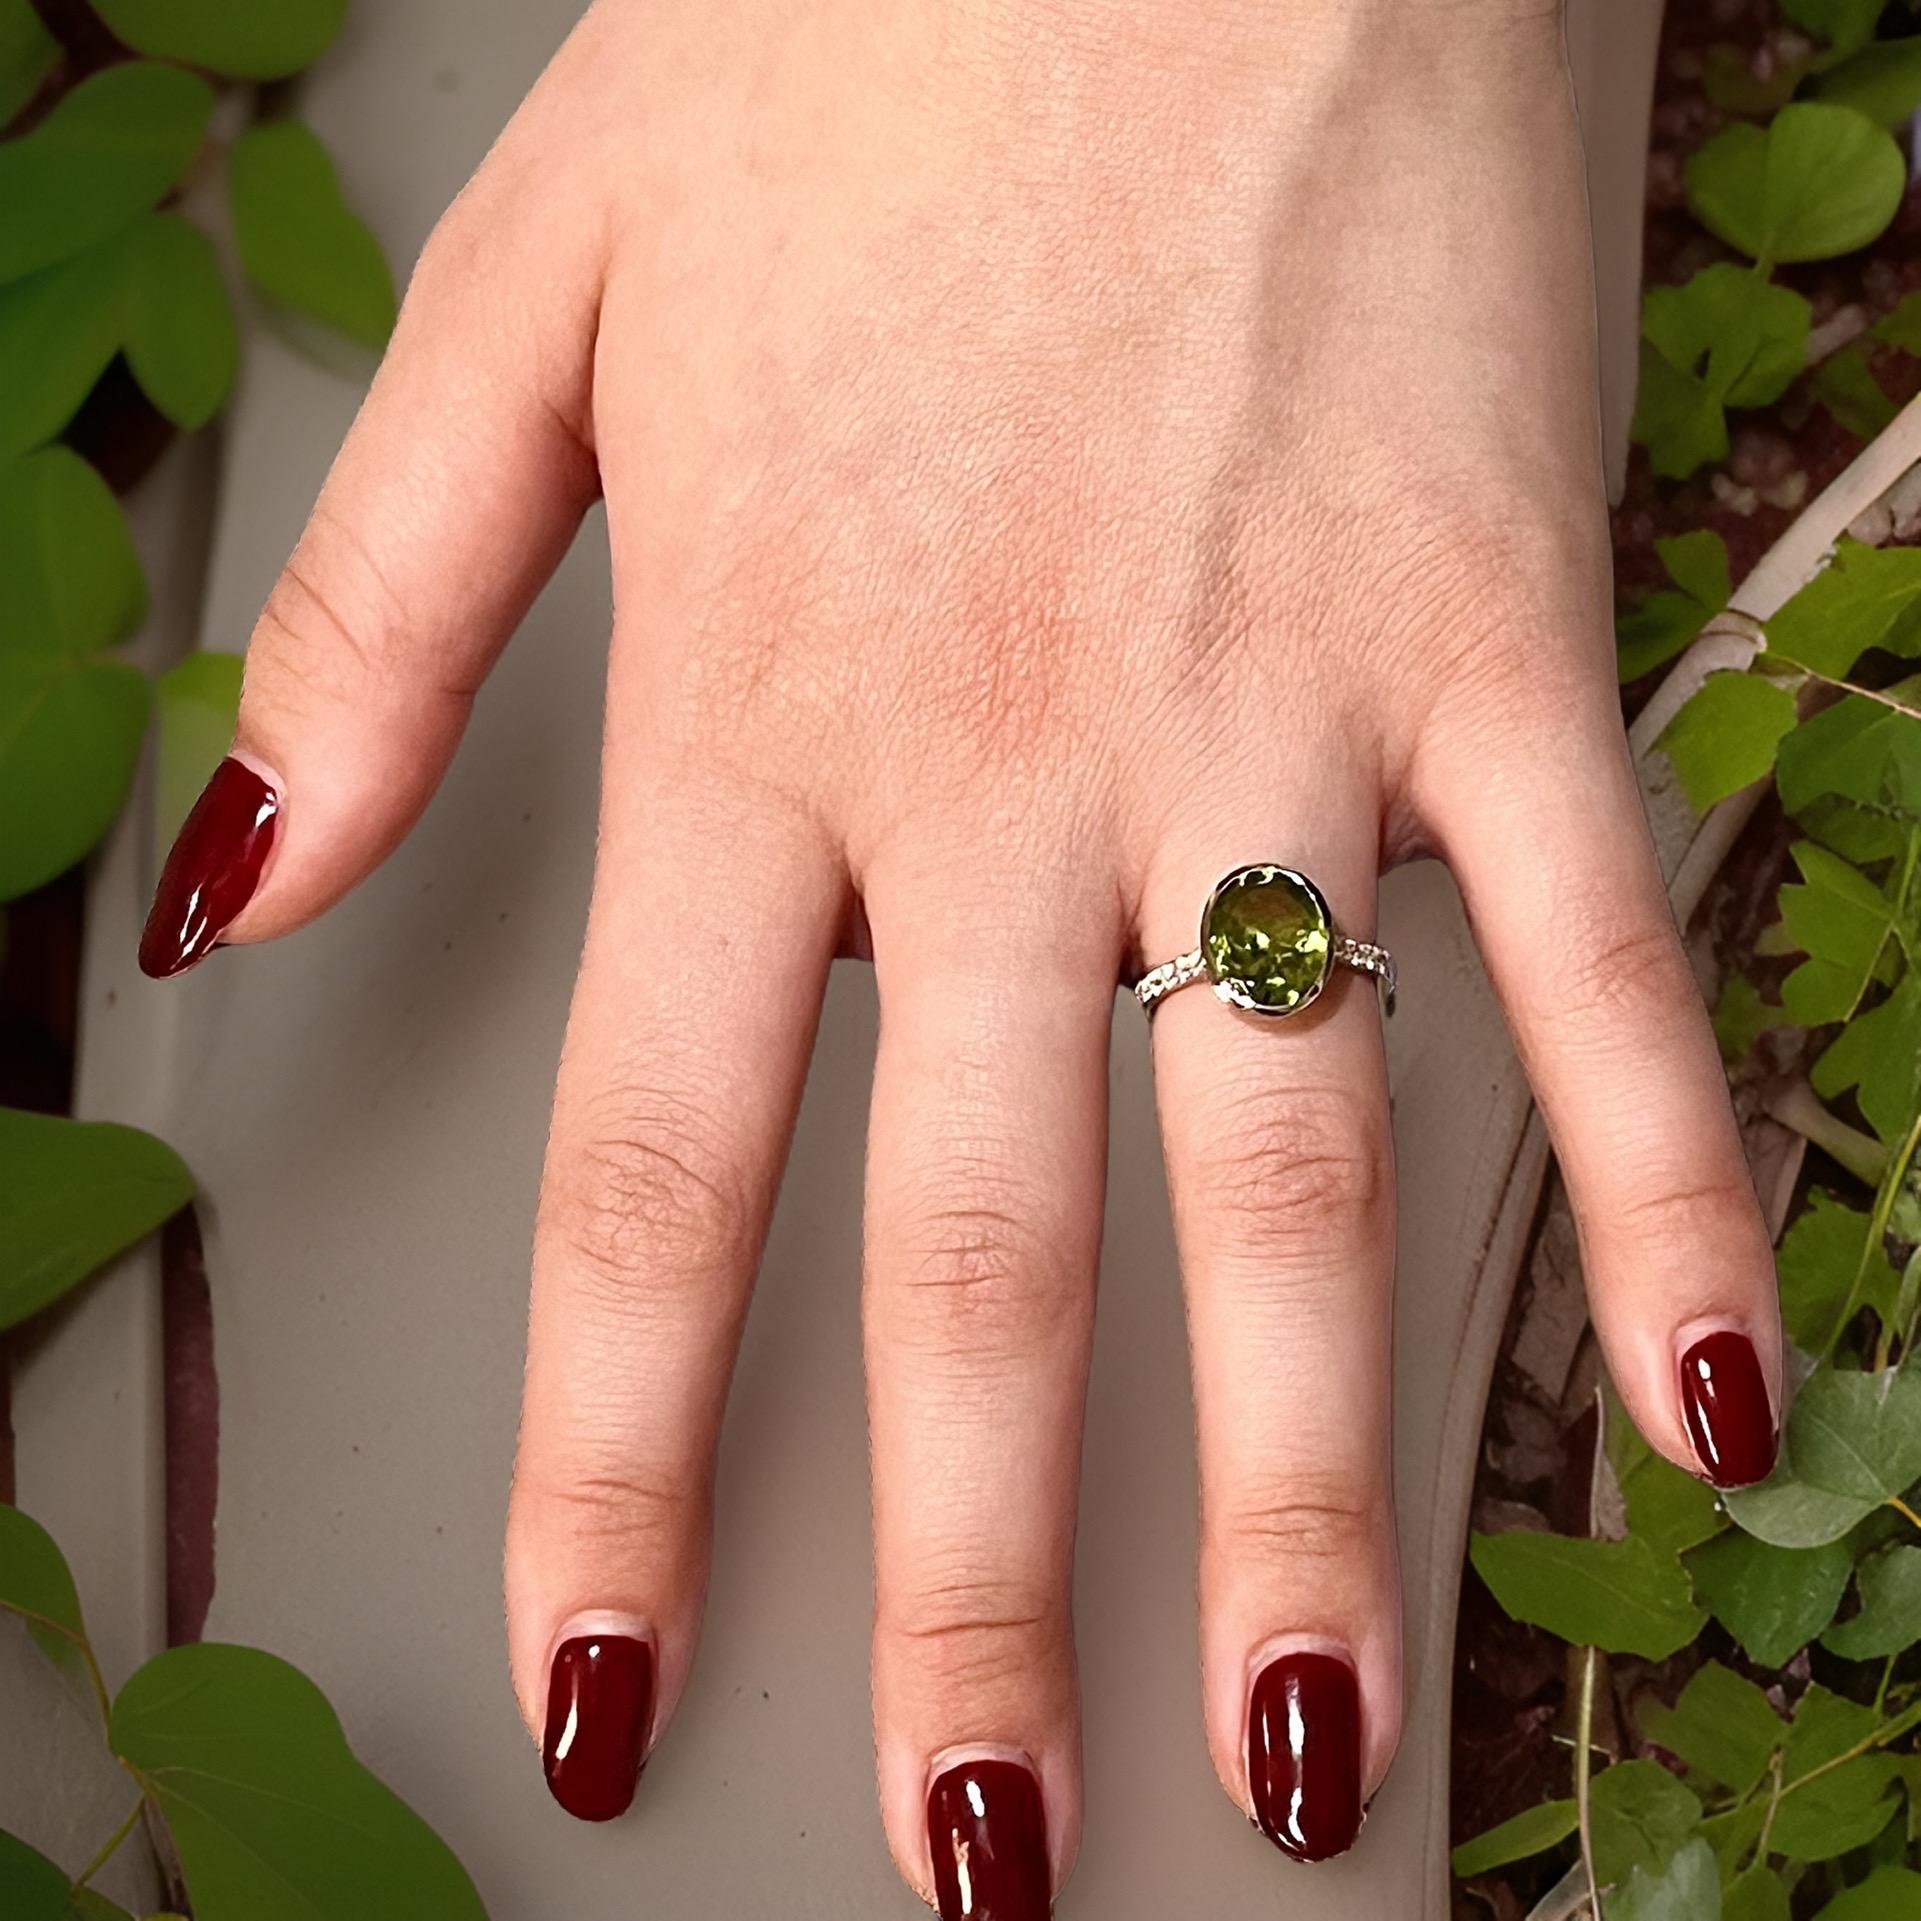 Natural Finely Faceted Quality Peridot Diamond Ring 6.5 14k W Gold 3.49 TCW Certified $4,950 310621

Please look at the attached video to see the beauty of this piece. If it is not available please request a link.

This is a one of a Kind Unique